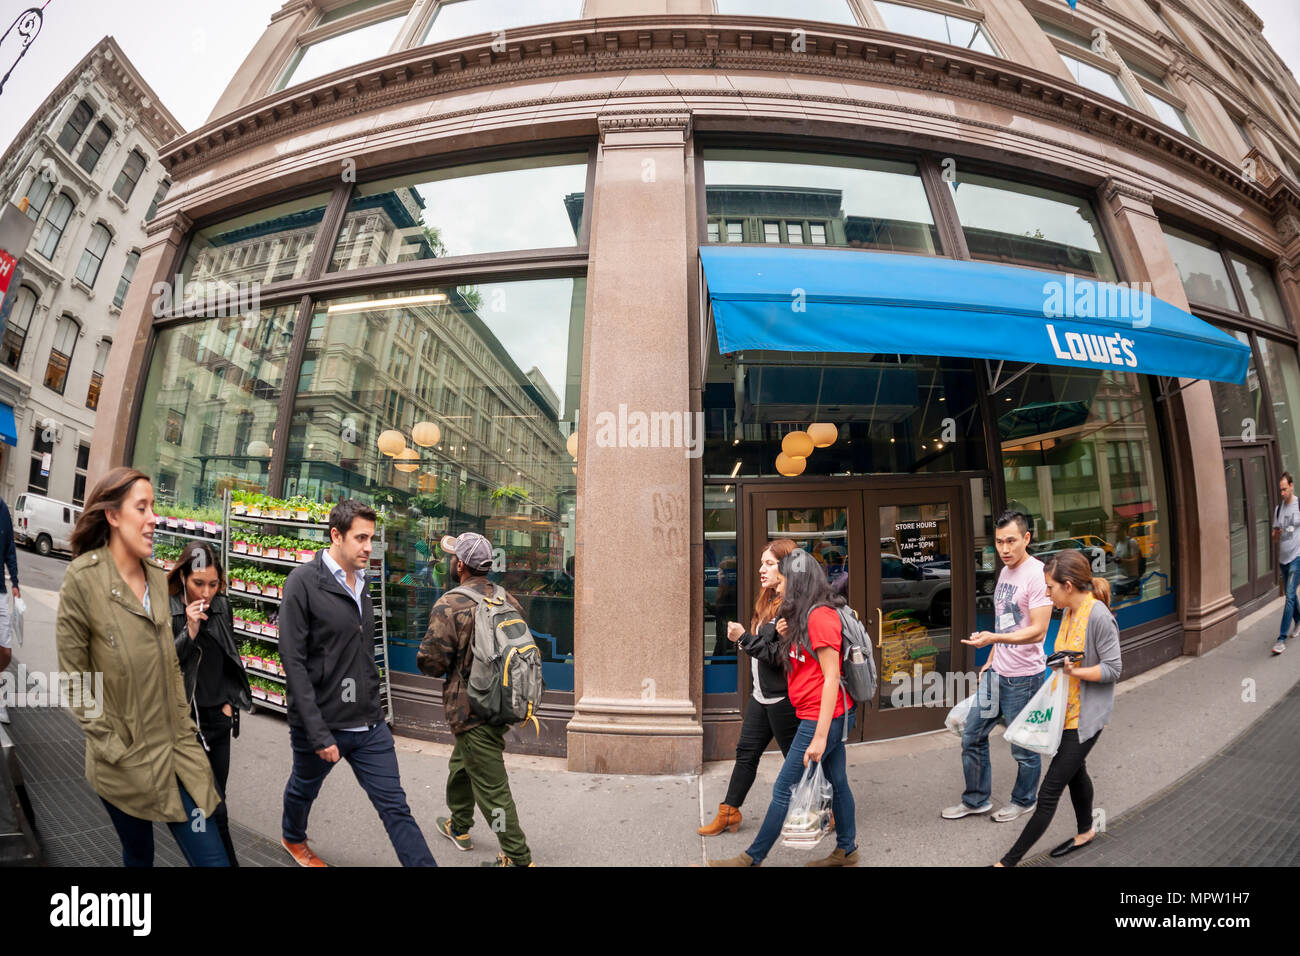 A Lowe's urban-oriented home improvement store in New York on Tuesday, May 22, 2018. Lowe's is the second-largest home improvement chain after Home Depot. (Â© Richard B. Levine) Stock Photo